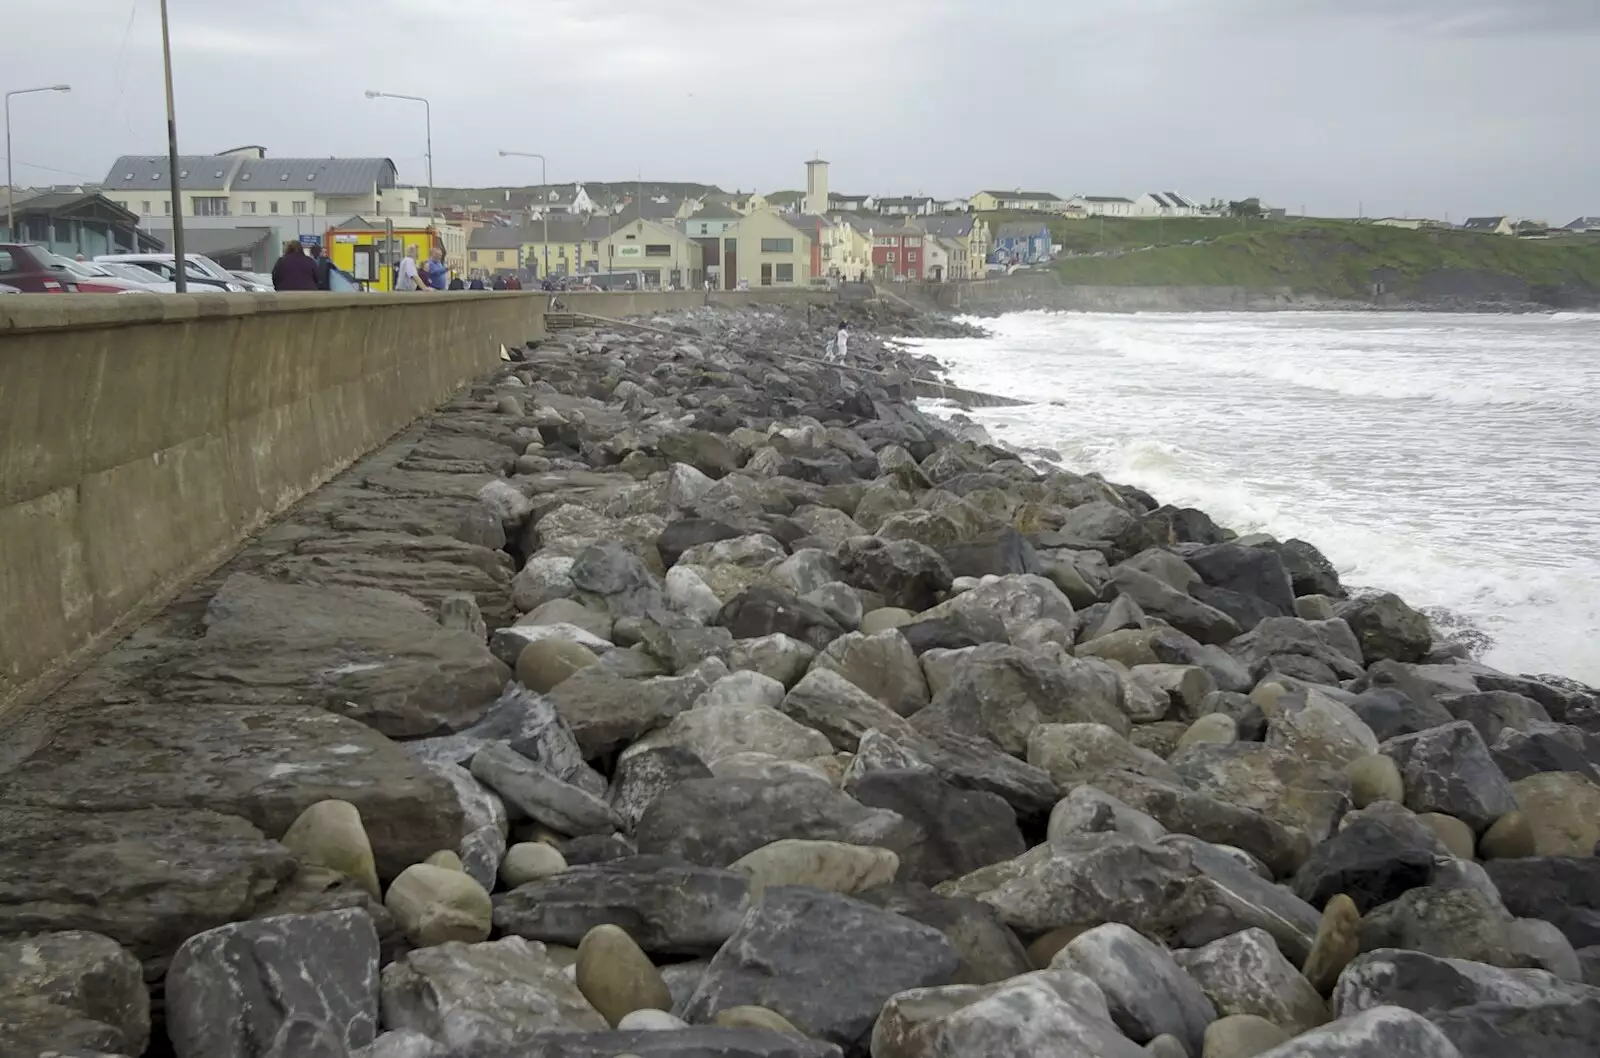 The rocky seafront at Lahinch, from Kilkee to Galway, Connacht, Ireland - 23rd September 2007